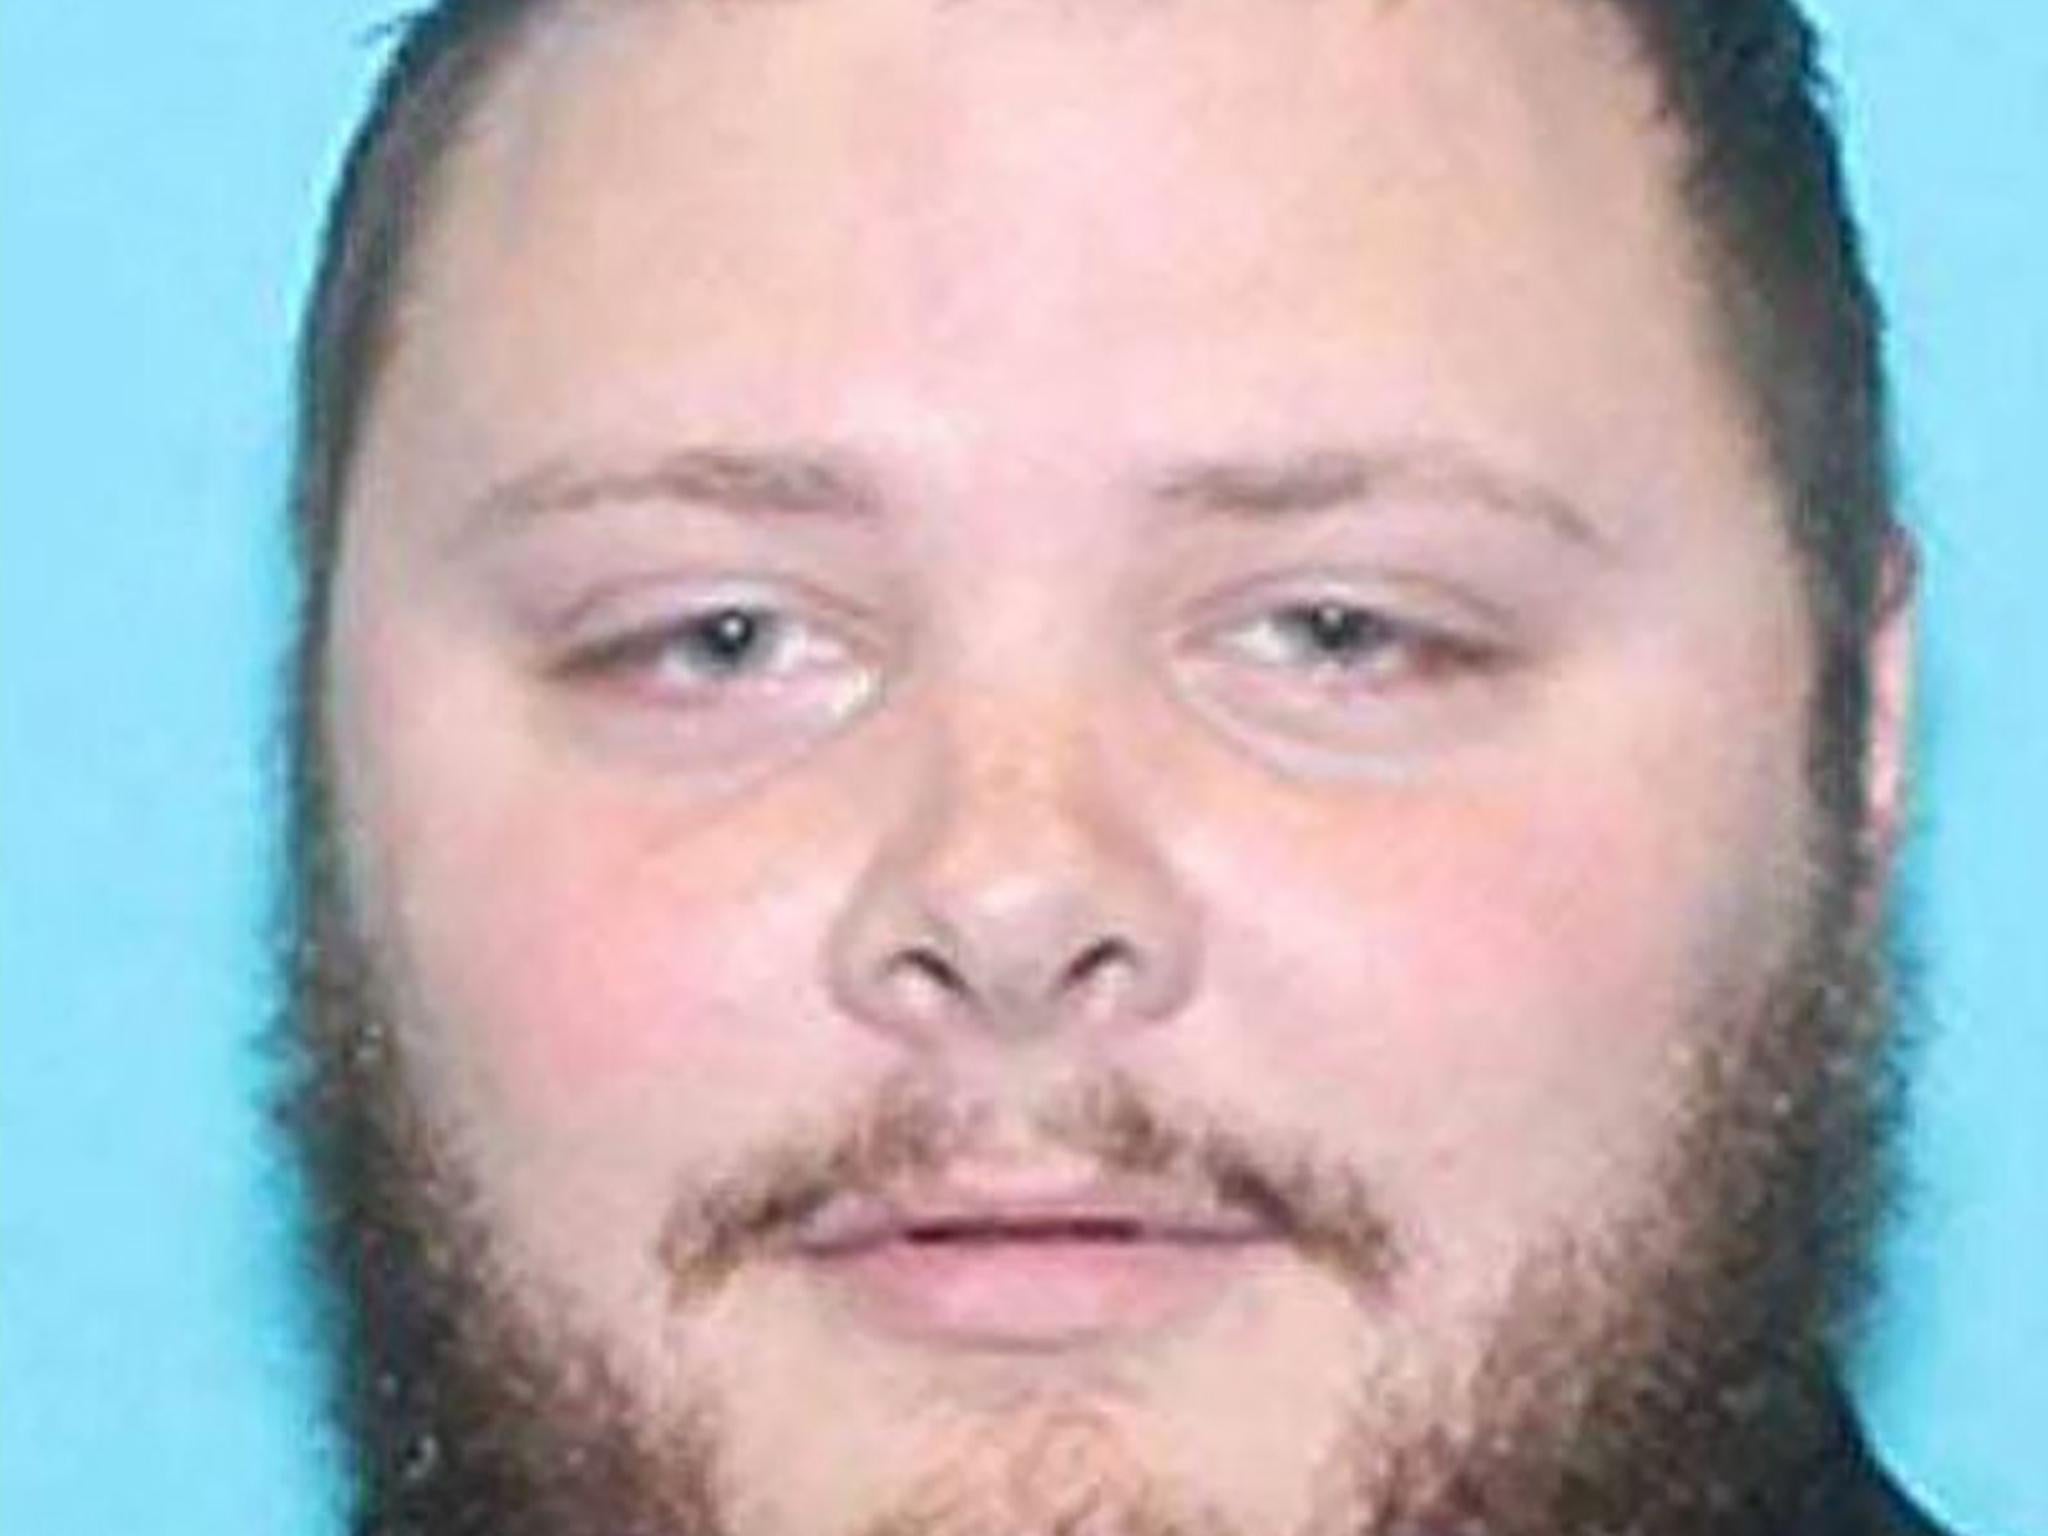 Devin Kelley opened fire in a church in Sutherland Springs, Texas